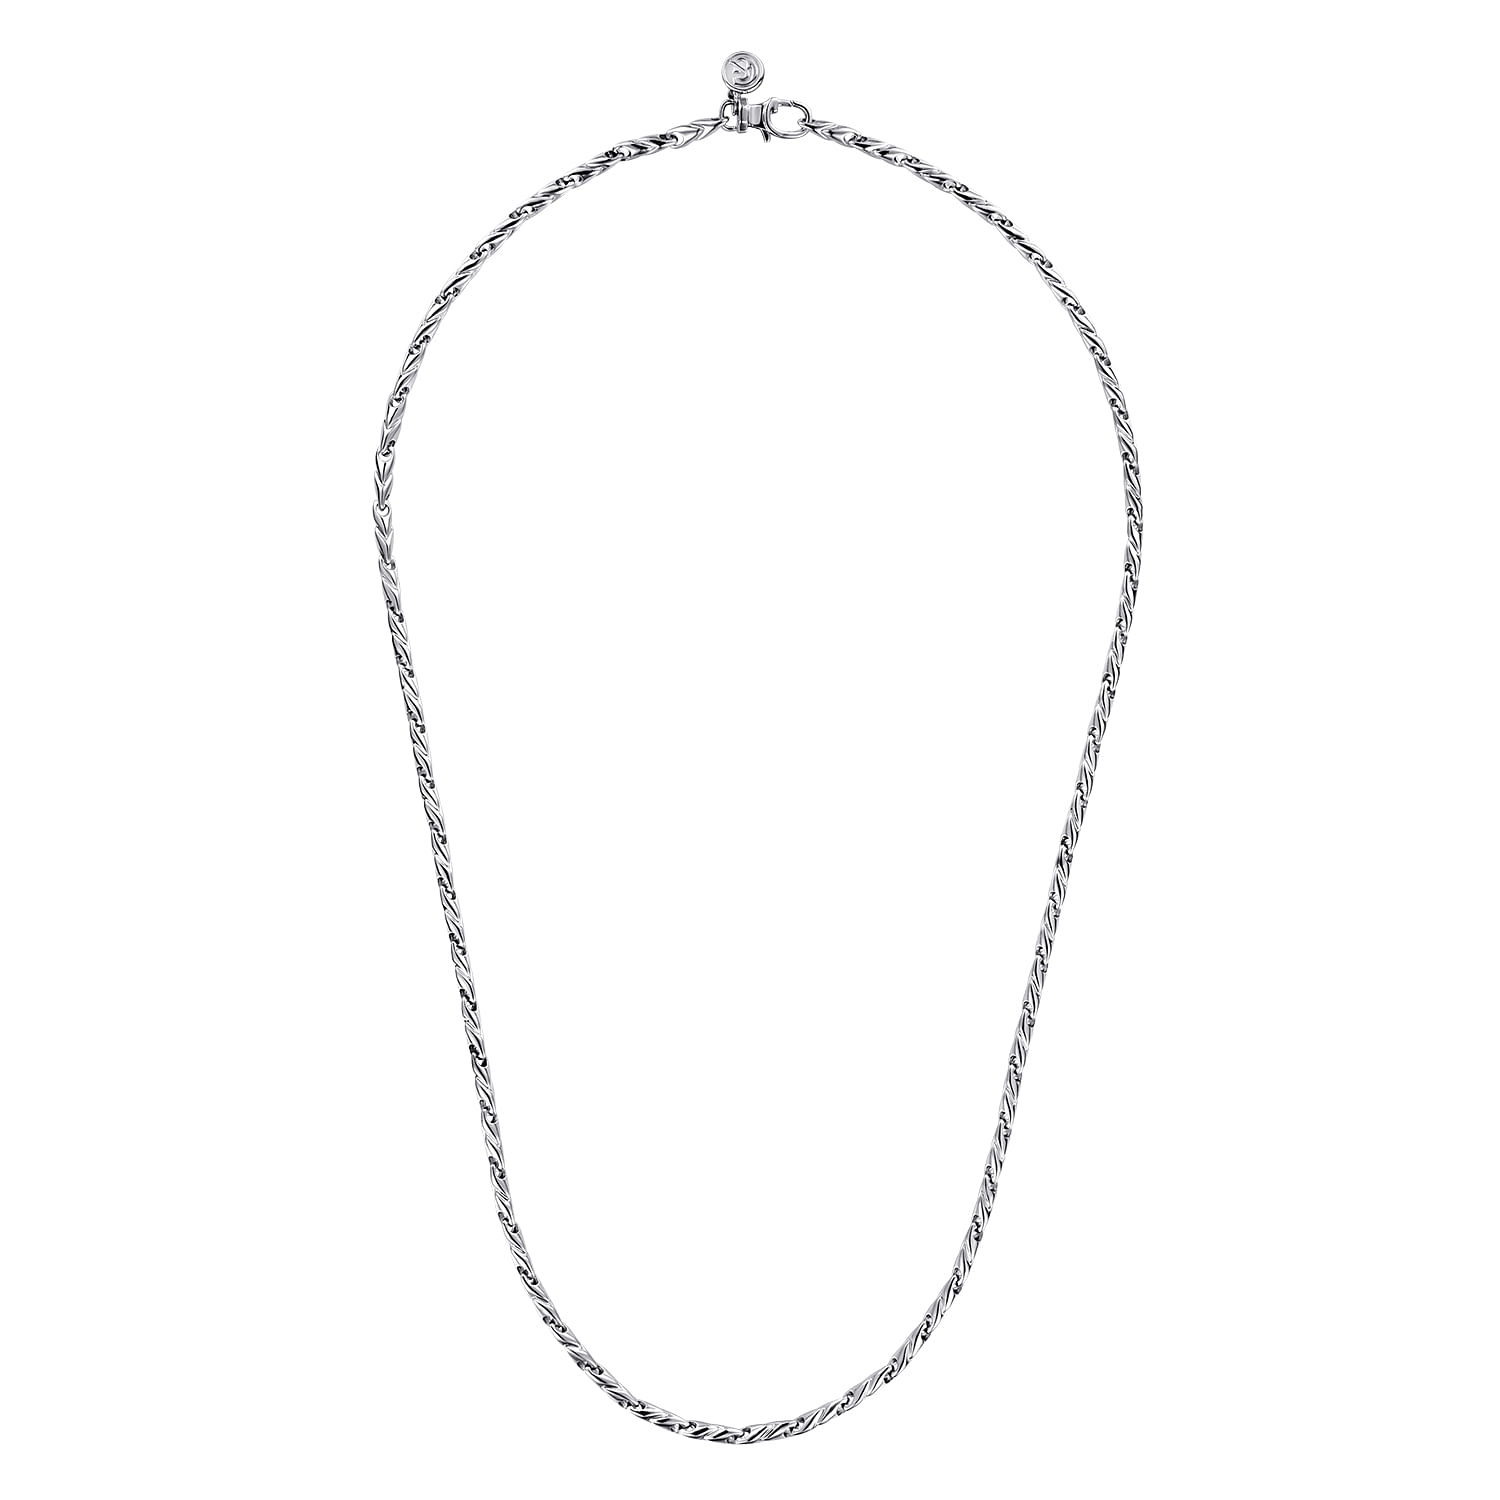 20 Inch 925 Sterling Silver Hollow Men's Chain Necklace